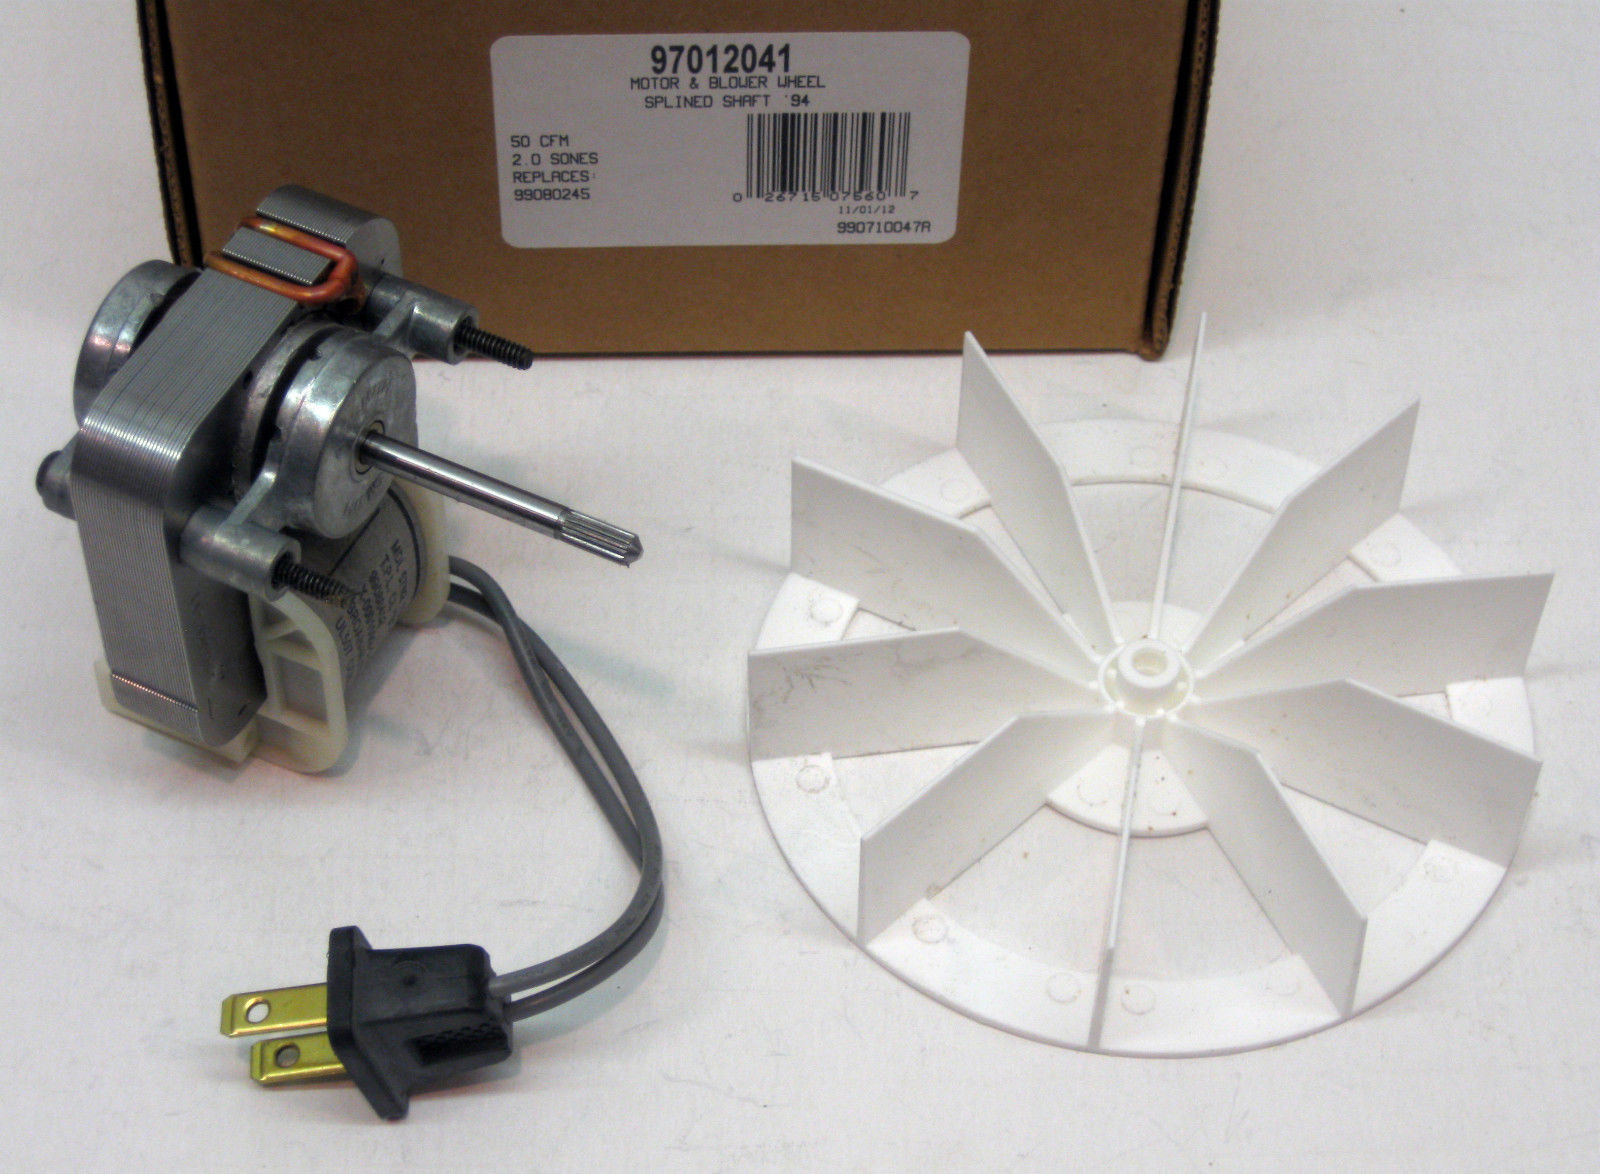 Broan Bathroom Fan Replacement Motor Image Of Bathroom And pertaining to dimensions 1600 X 1174